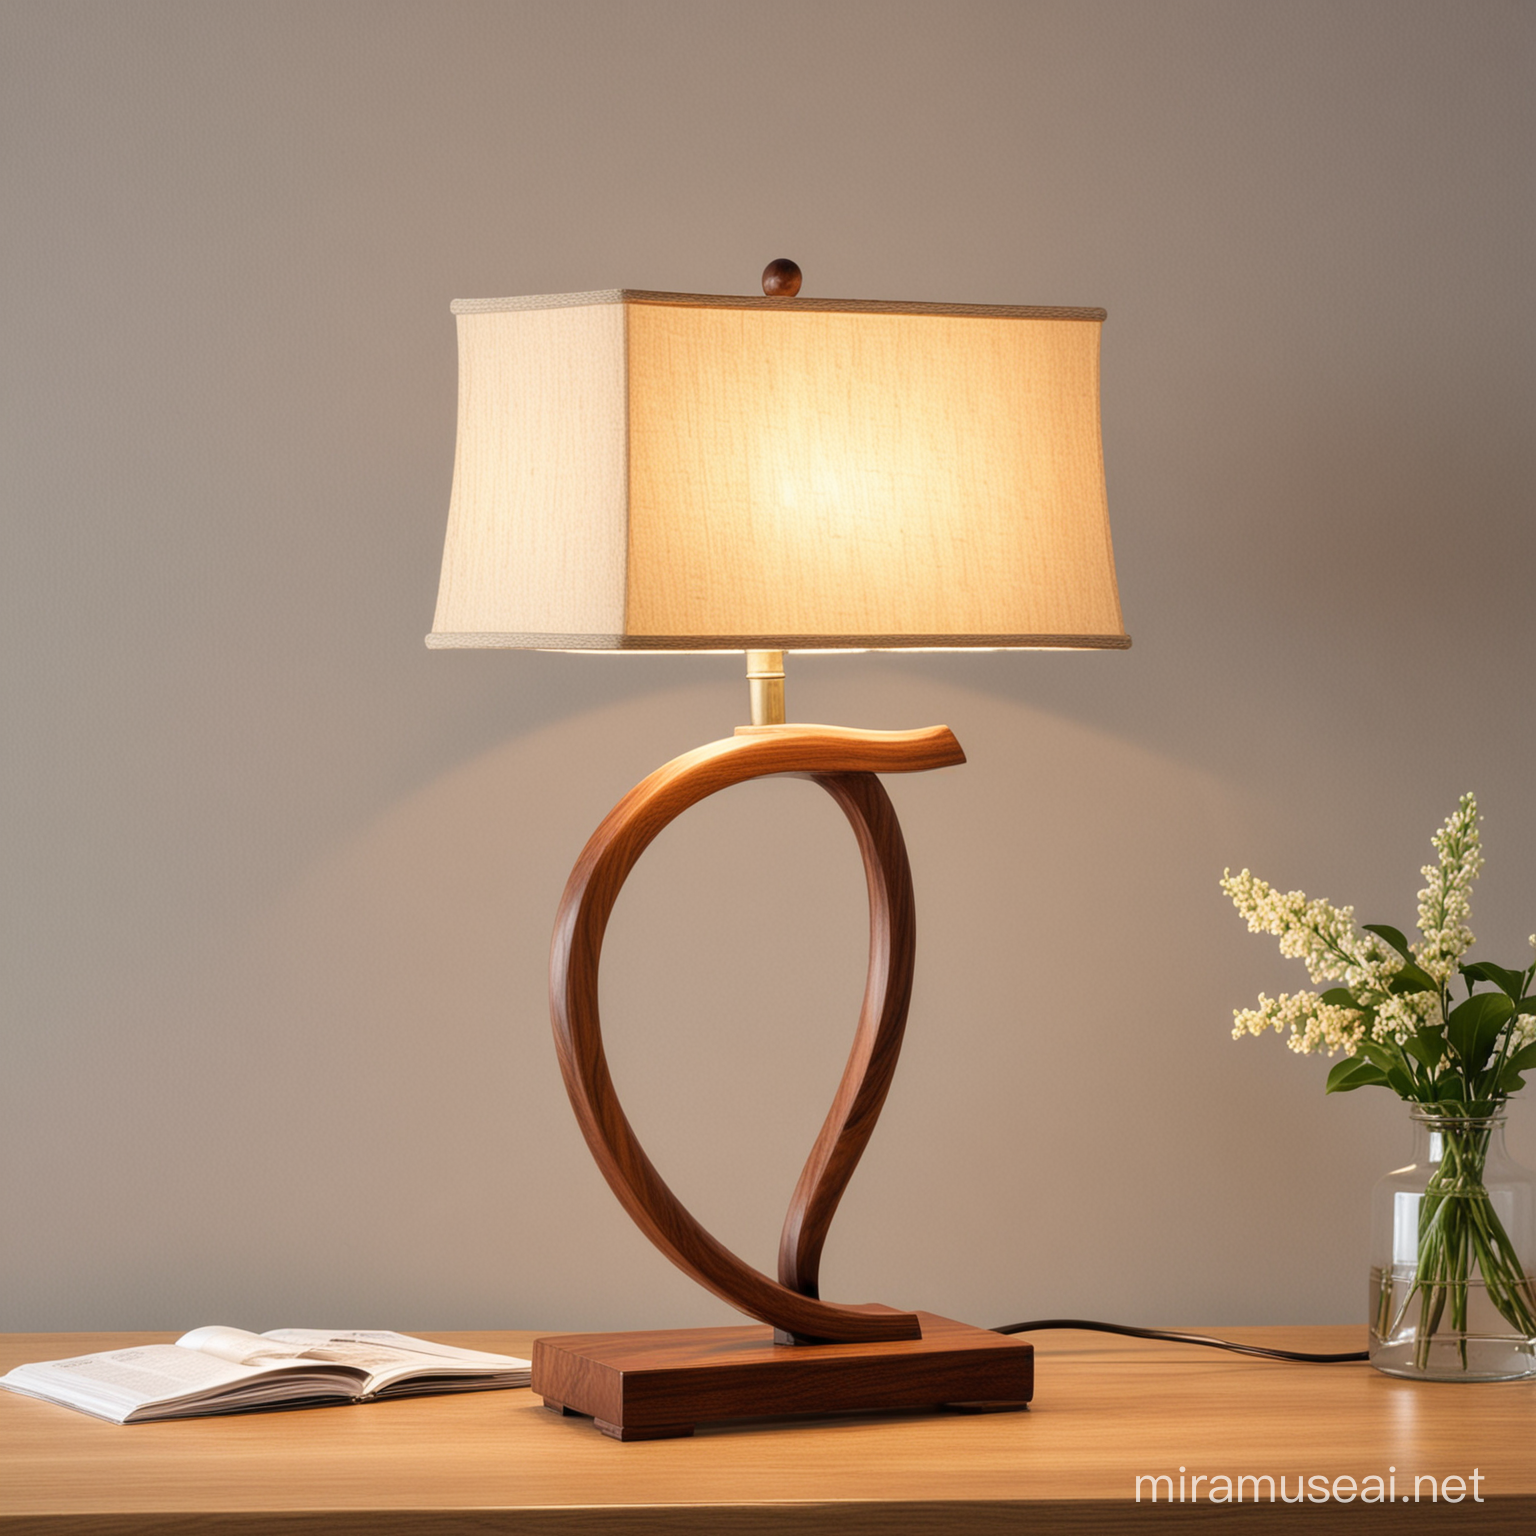 Classic Wooden Table Lamp with Curved Design